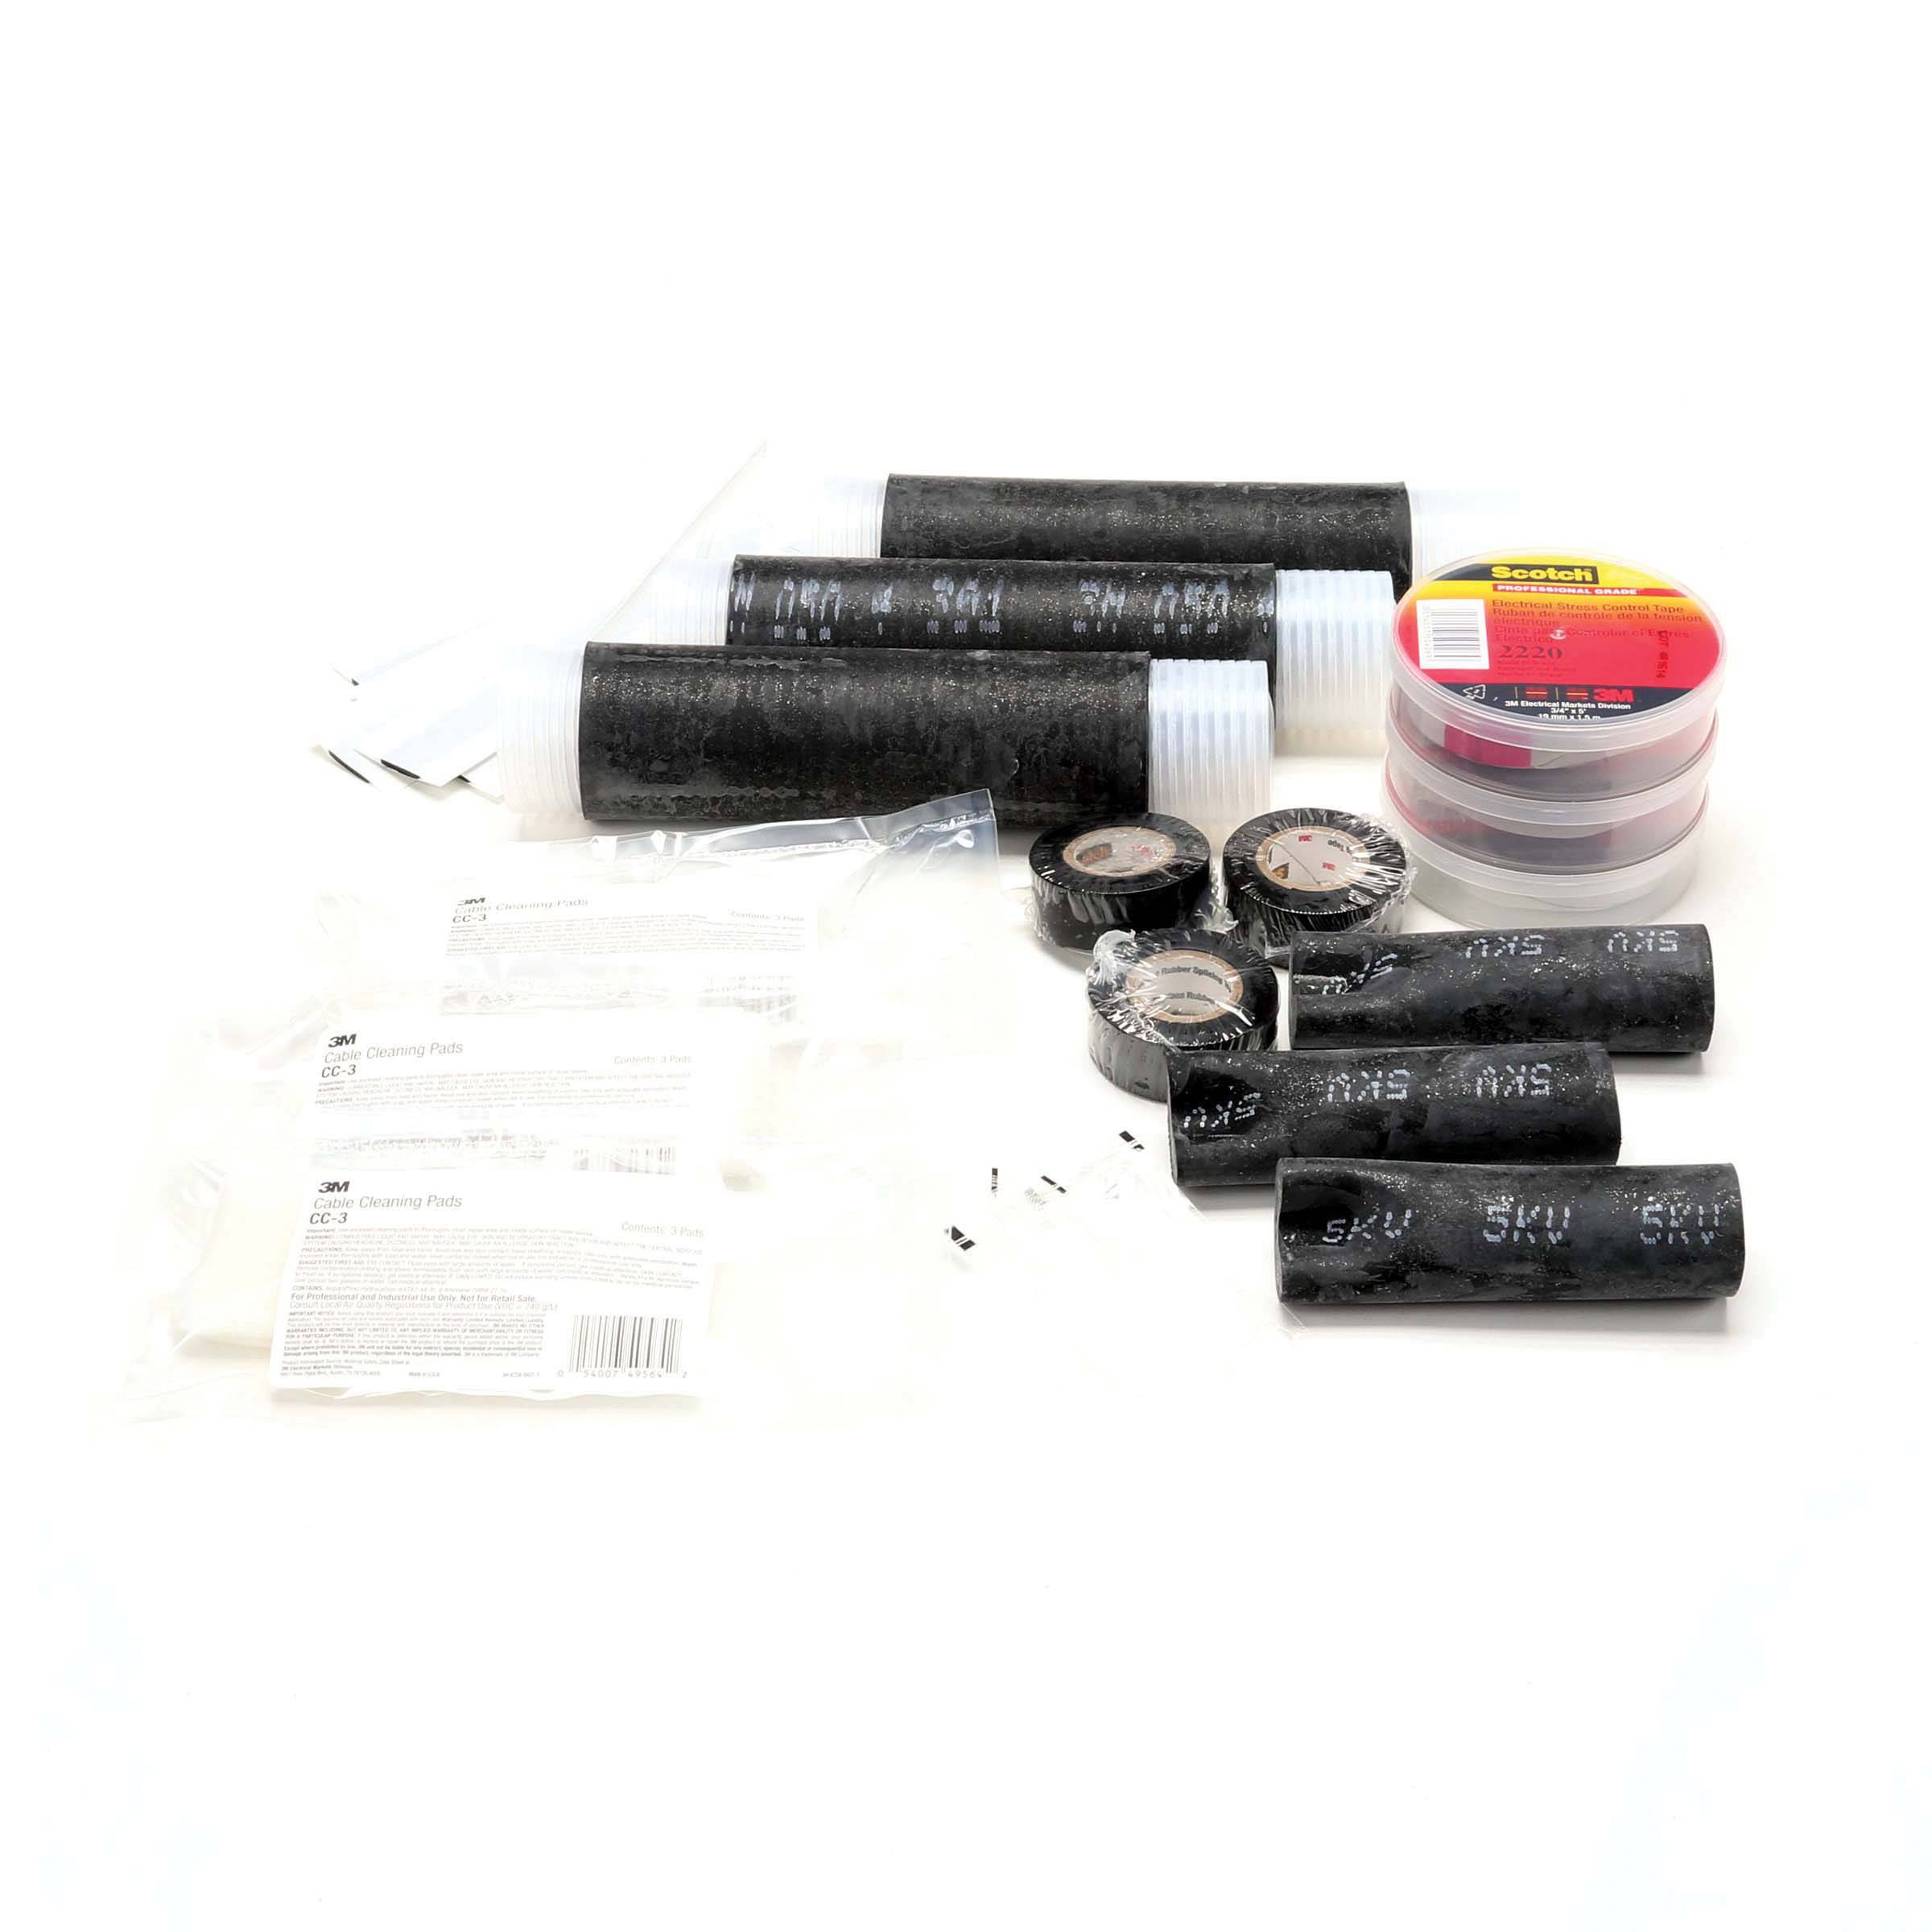 5 to 8 kV, 3M 5322 Motor Lead Pigtail Splice Kit (Discontinued by Manufacturer)